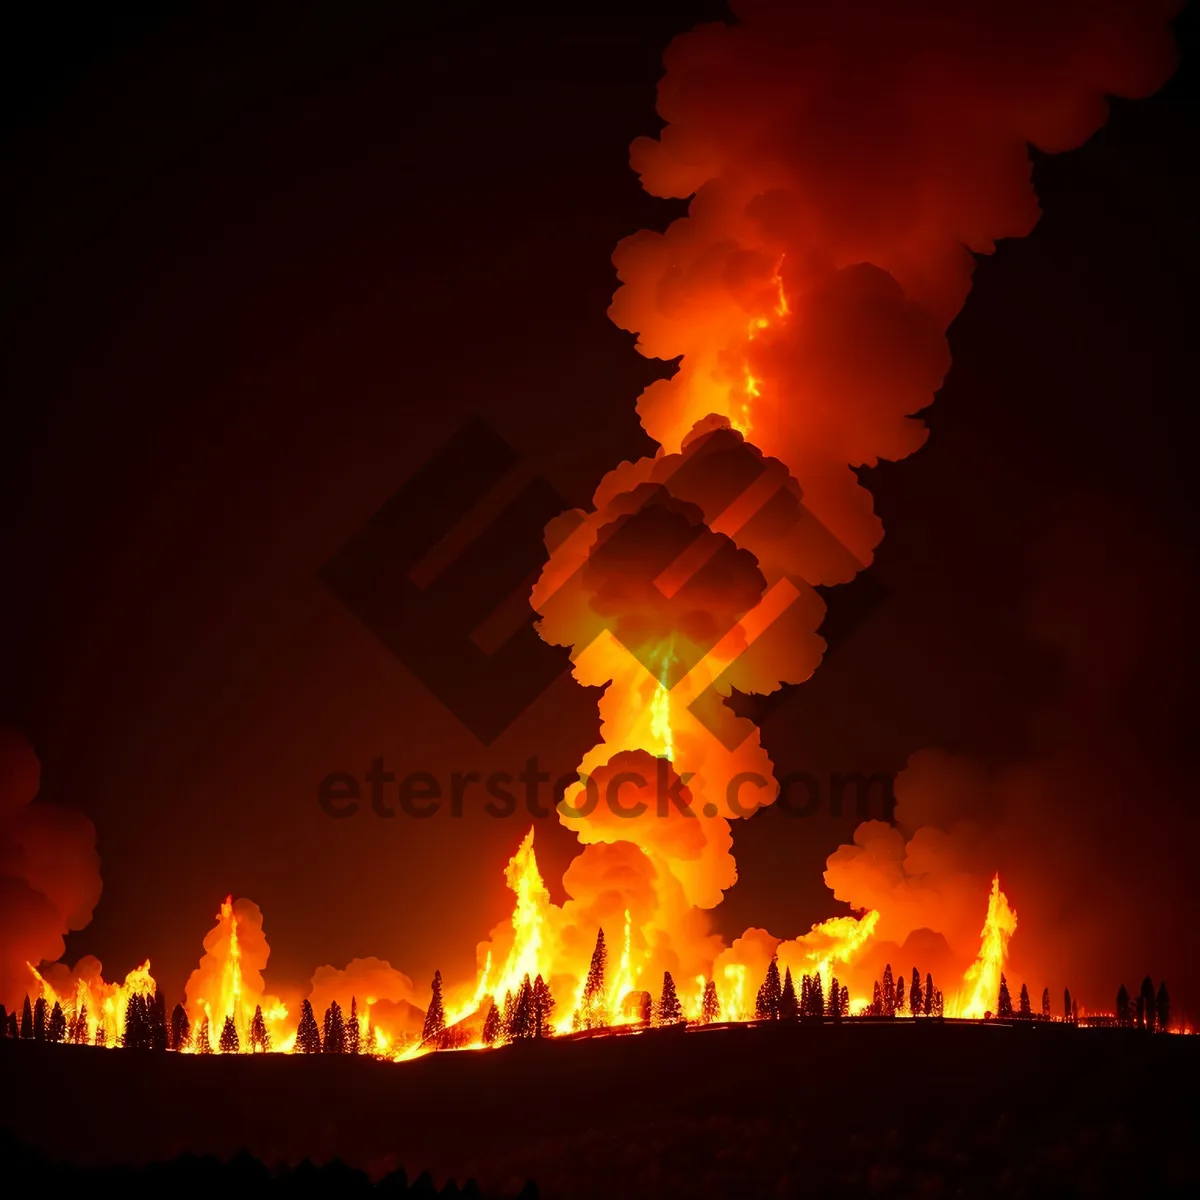 Picture of Inferno of Power: Fiery Blaze Engulfing Weapon